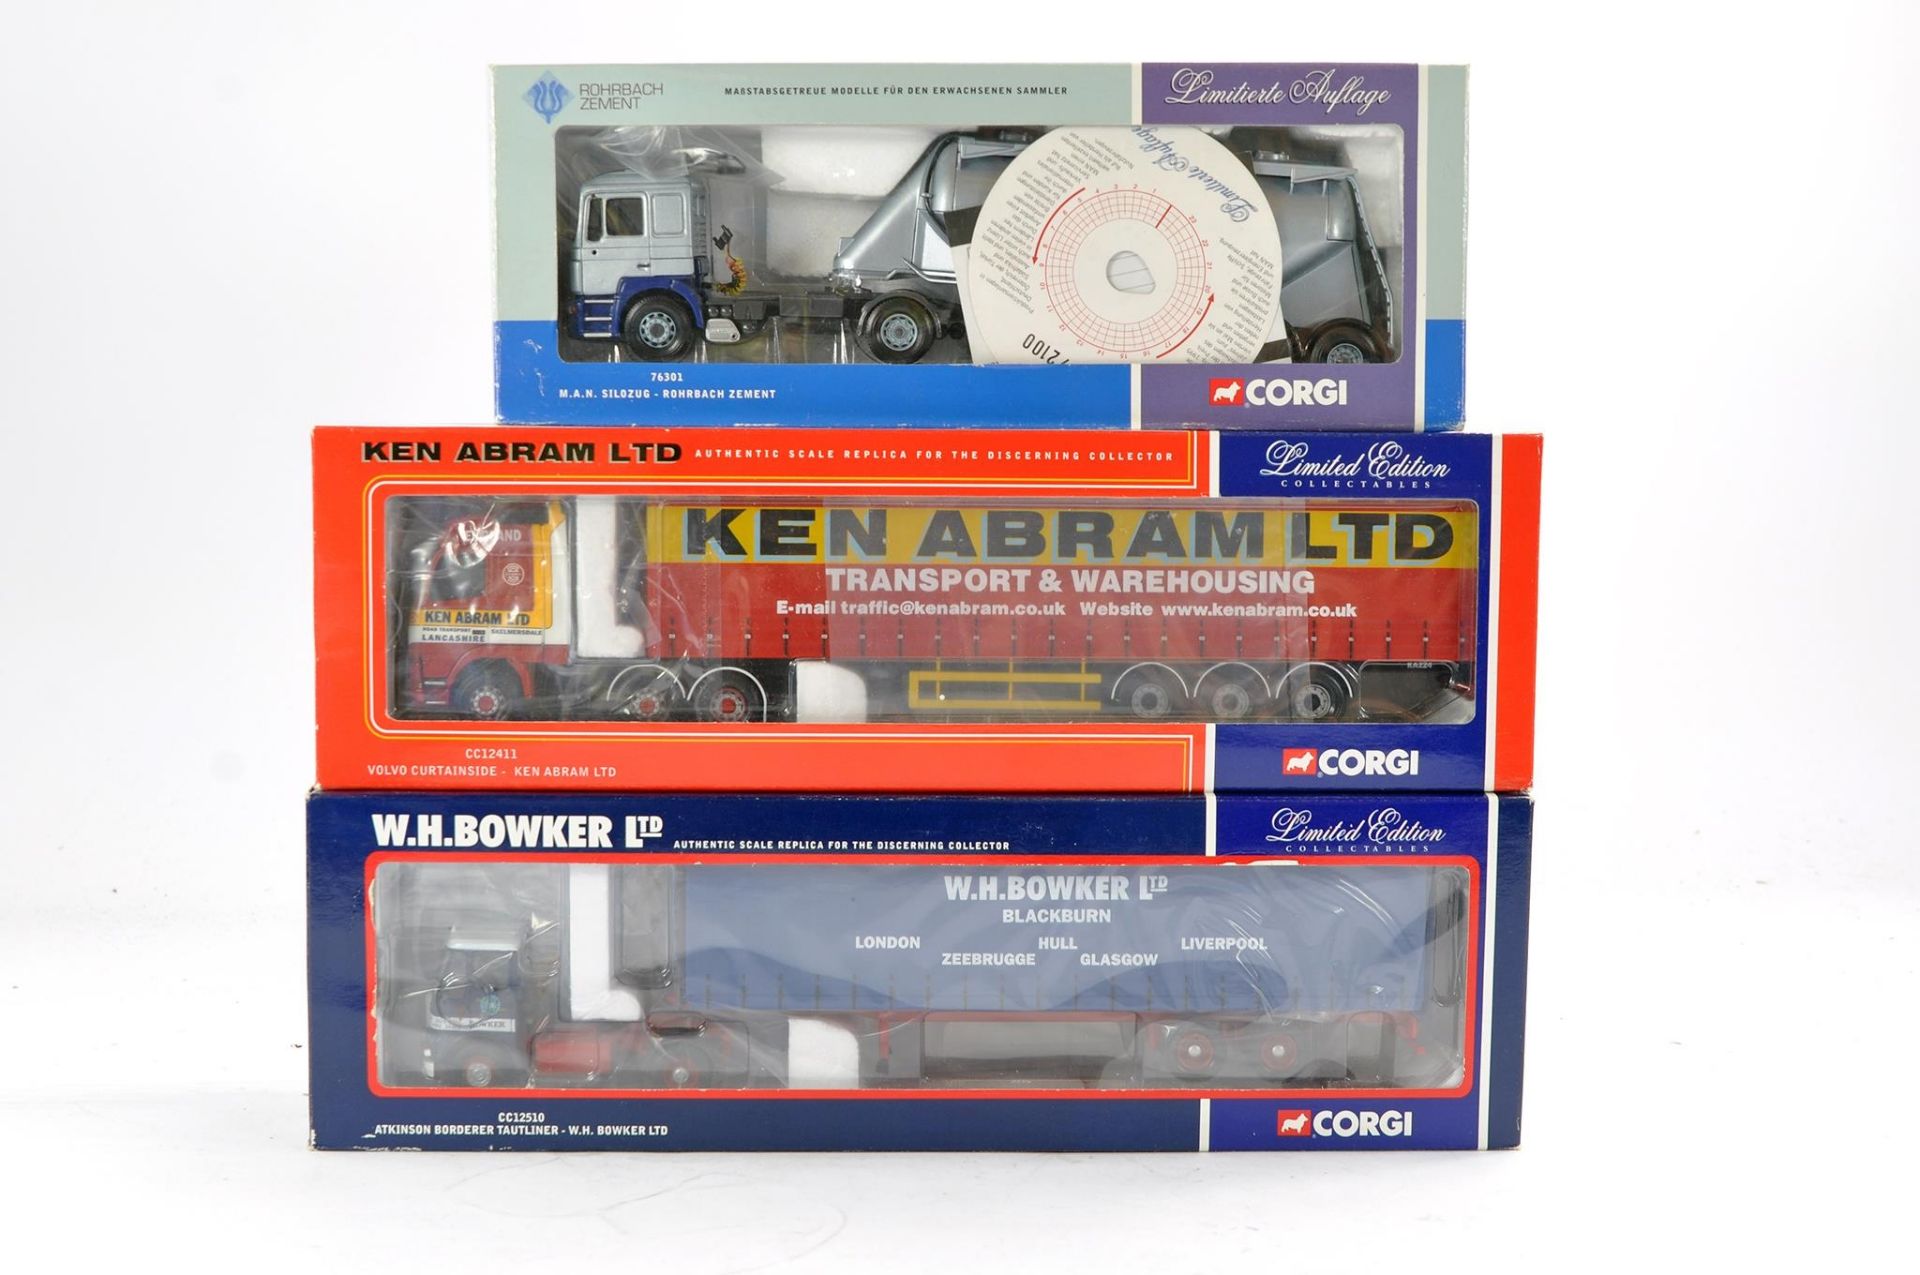 Corgi Diecast Model Truck Issues comprising No. CC12510 Atkinson Borderer Tautliner in the livery of